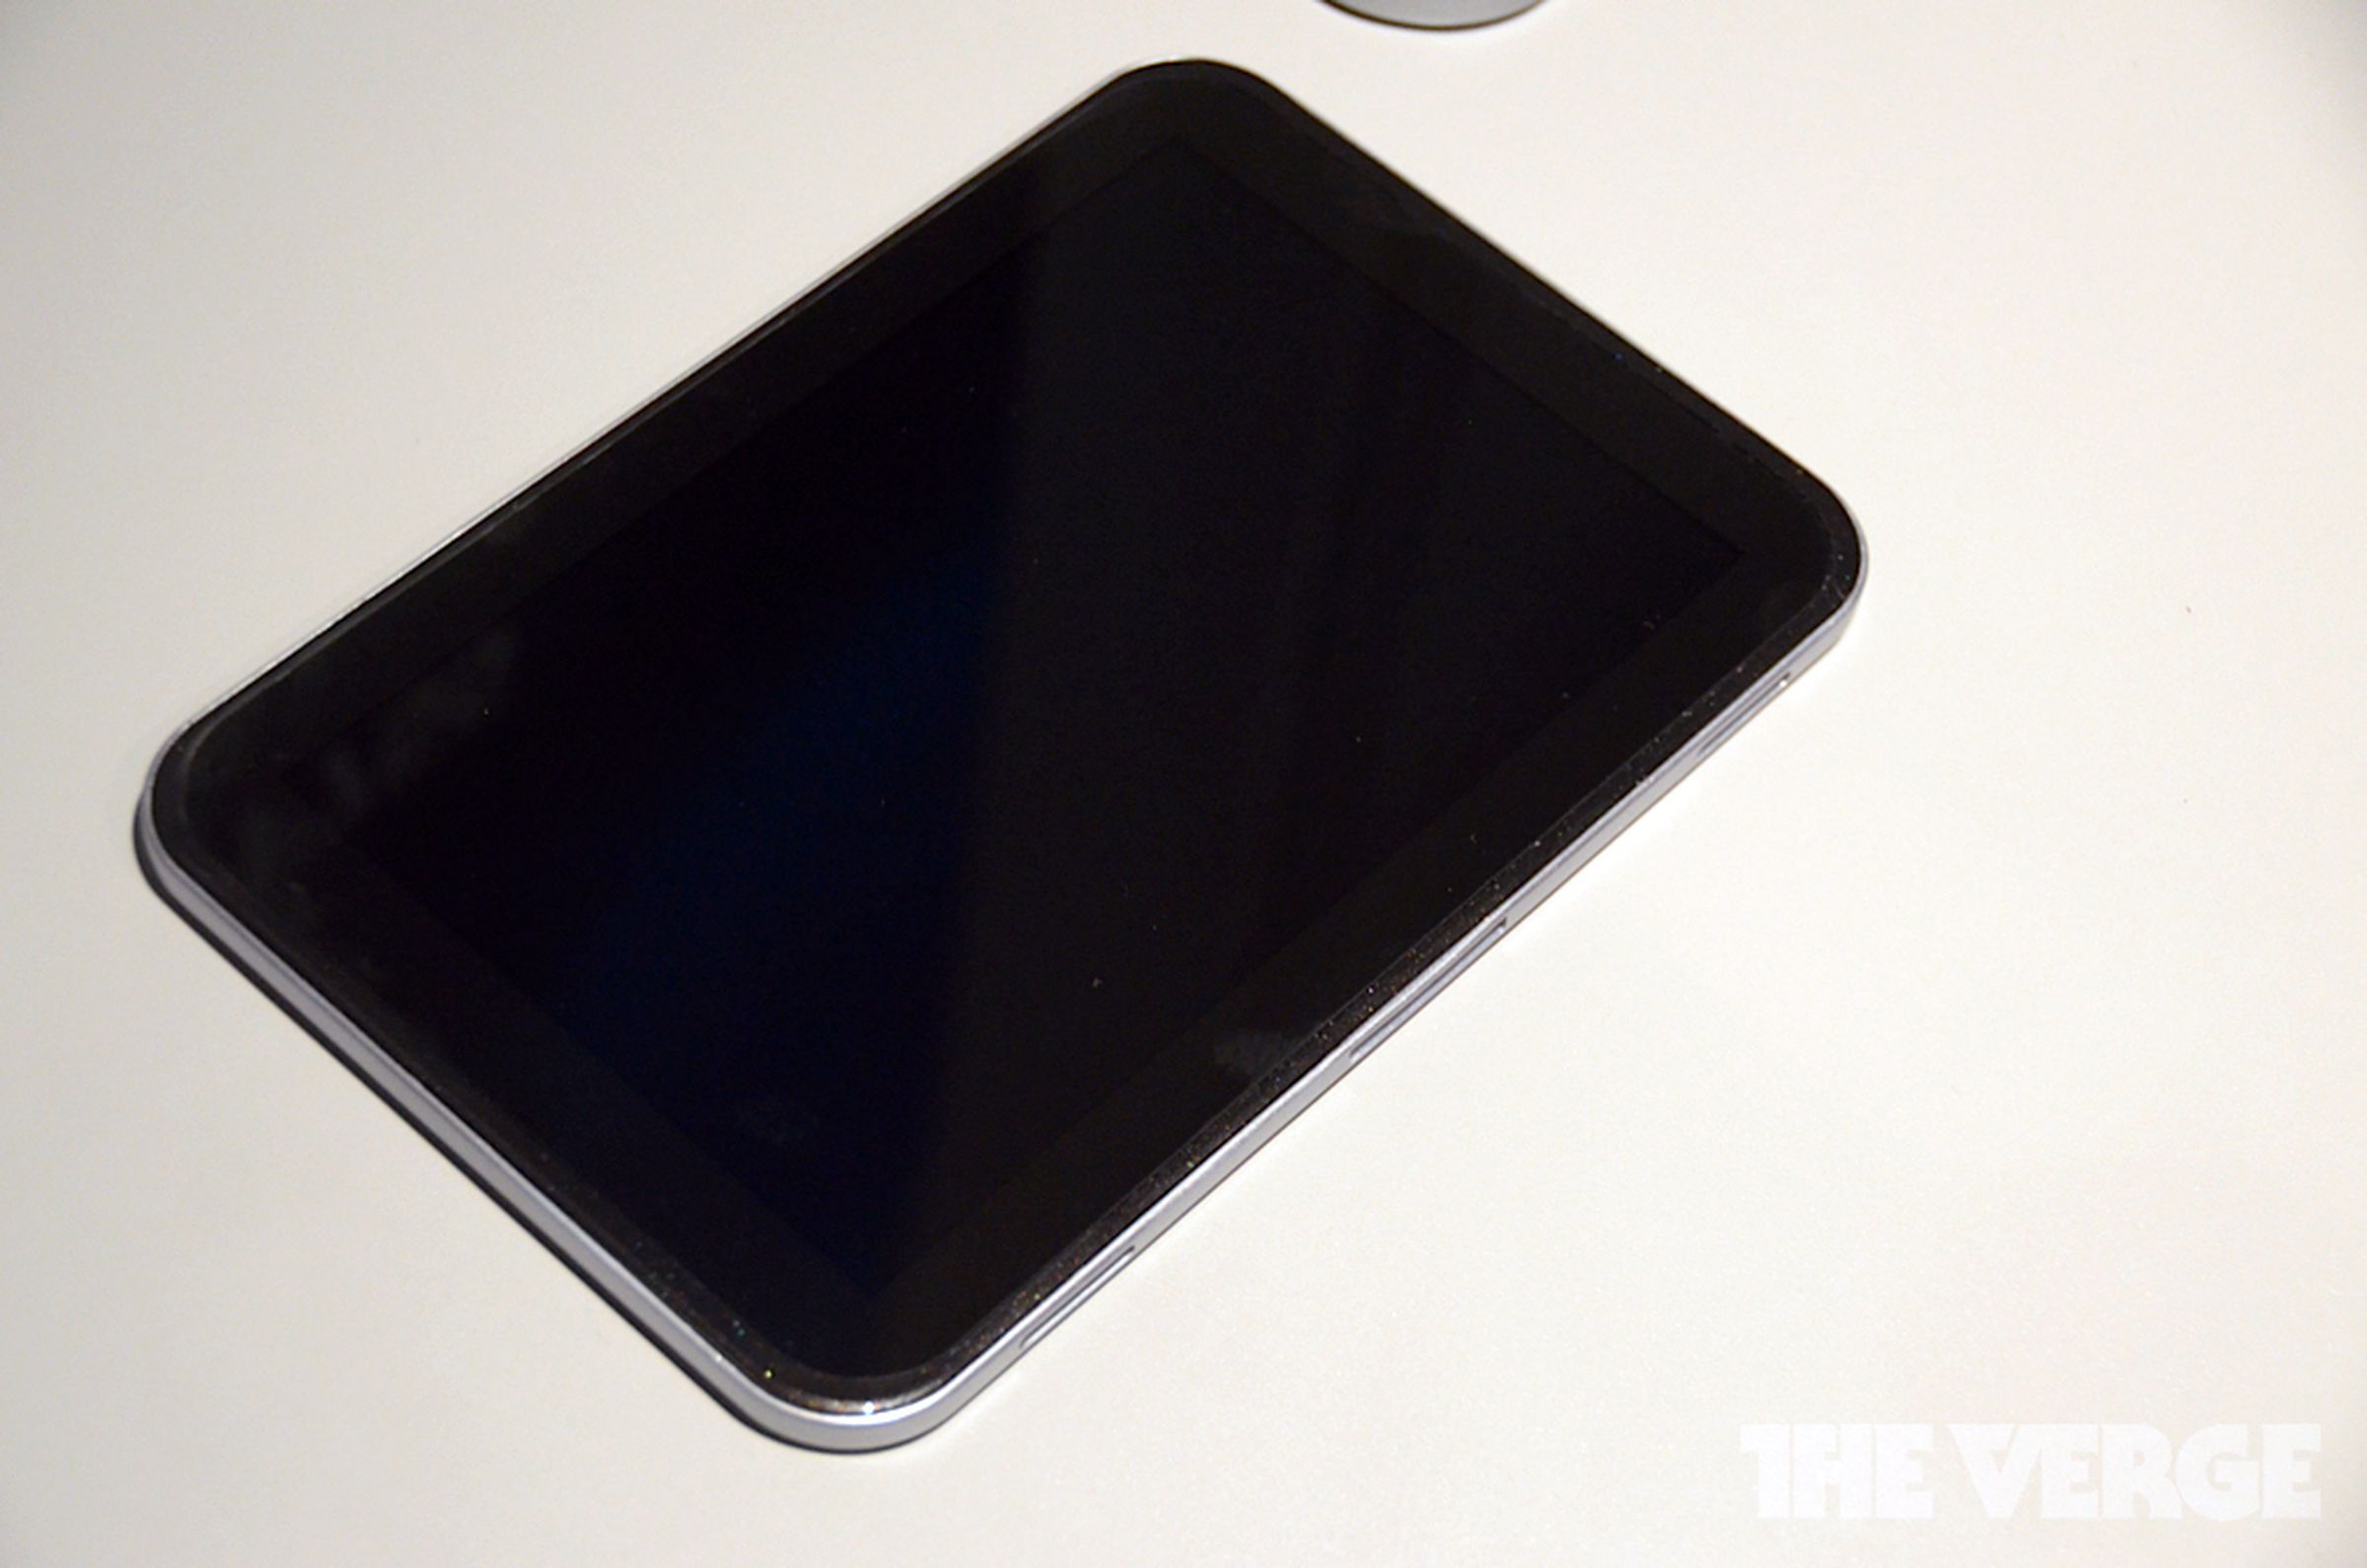 Toshiba's 21:9 phone and tablet prototypes hands-on picture